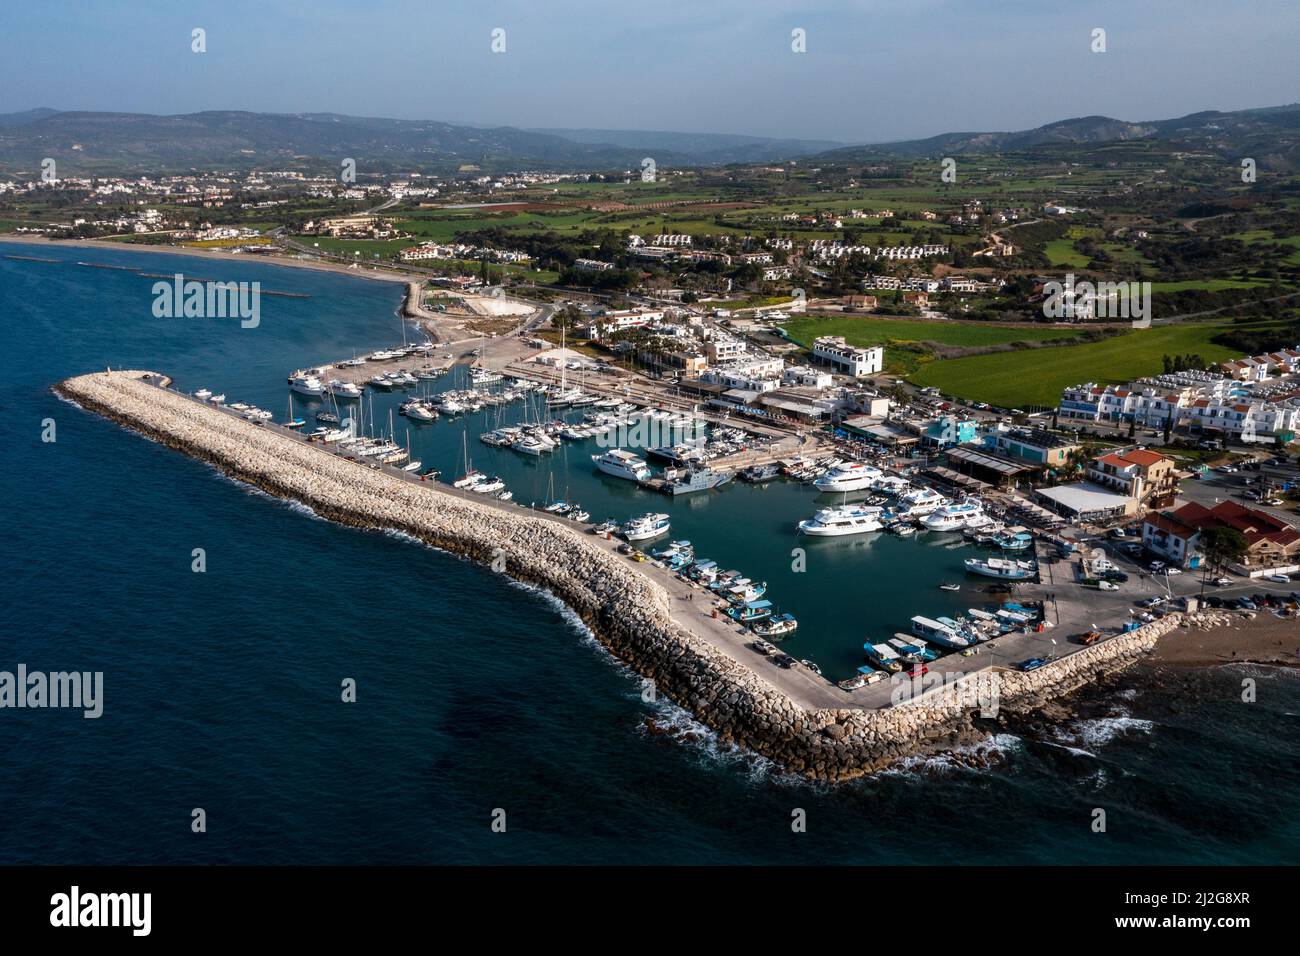 Aerial view of Latchi harbour, Republic of Cyprus. Stock Photo